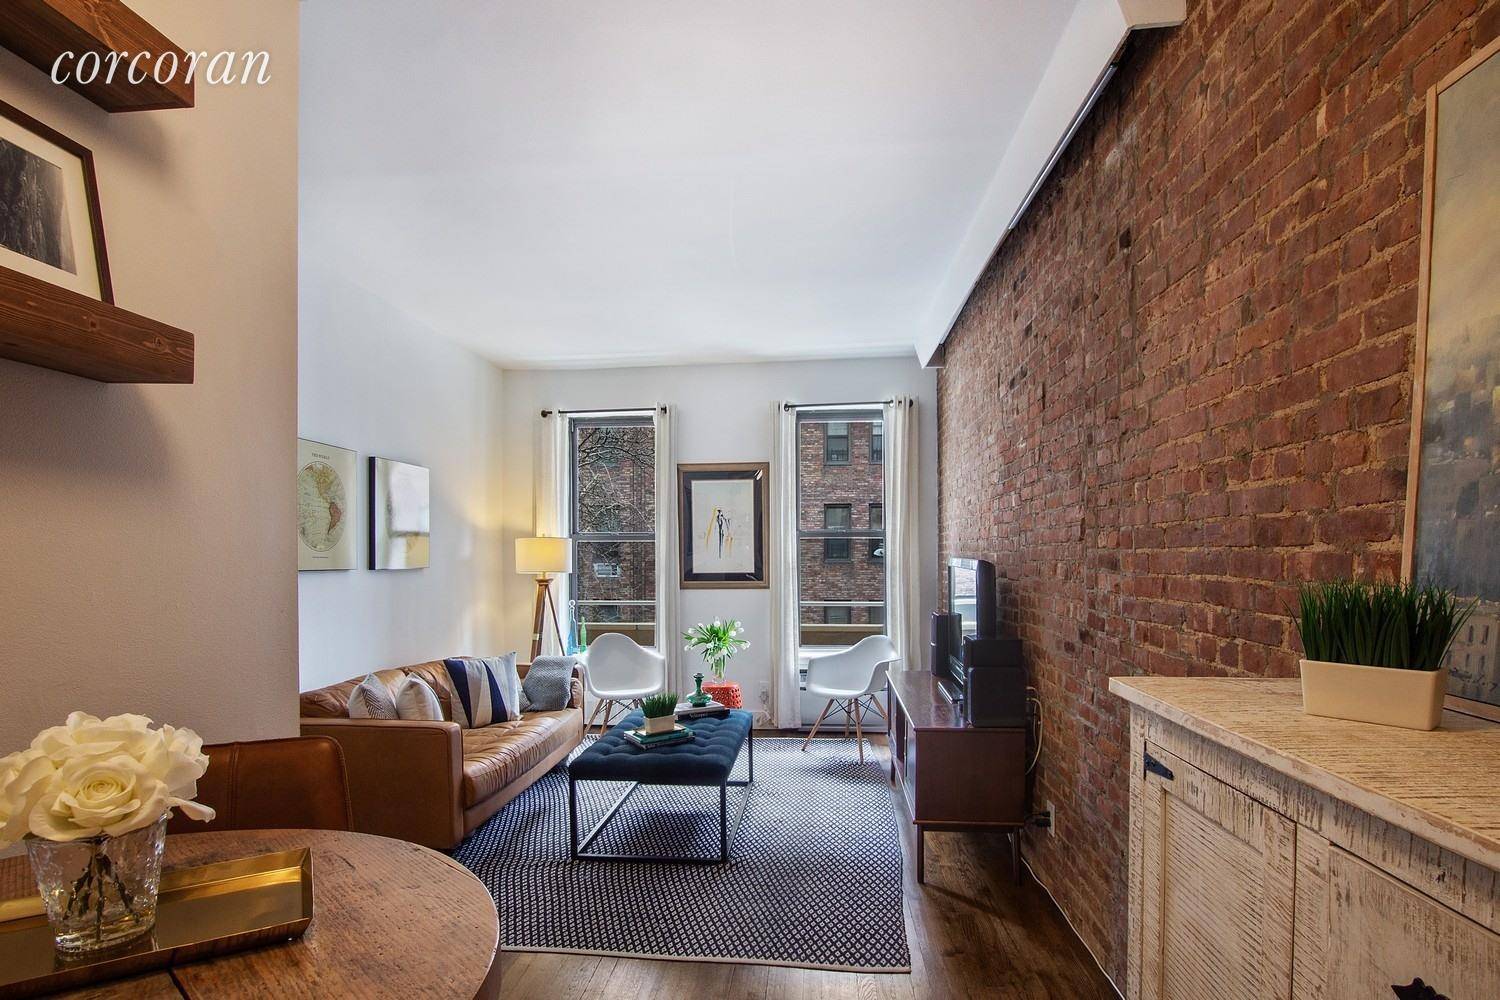 Renovated 1 bed, 1. 5 bath duplex offers warmth and charm with 9.